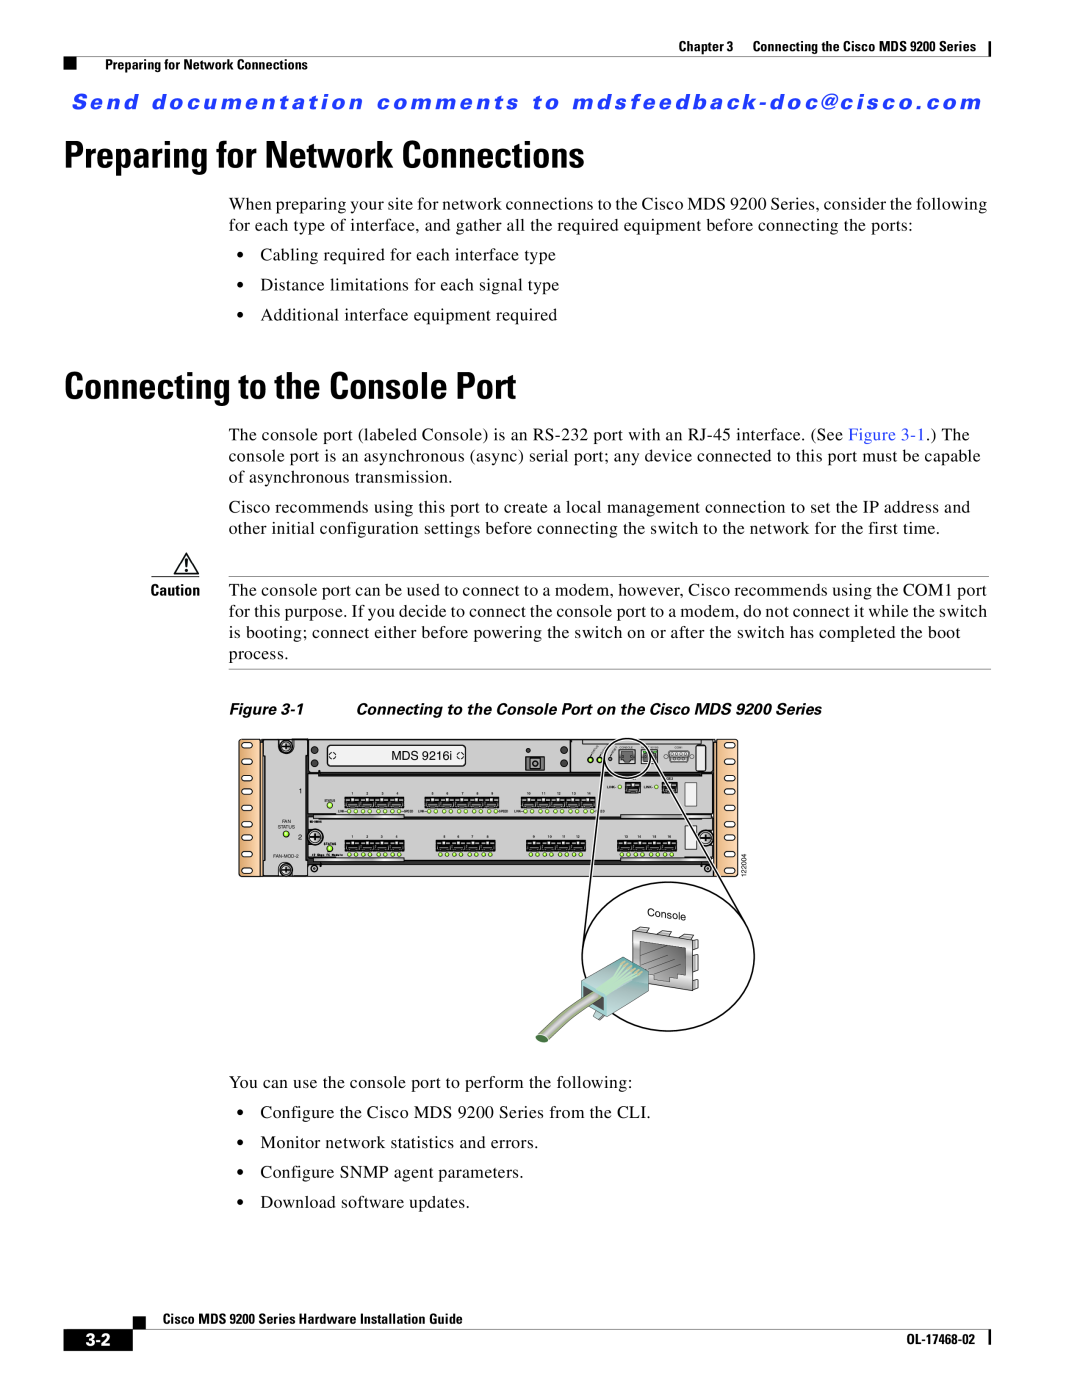 Cisco Systems MDS 9200 Series manual Preparing for Network Connections, Connecting to the Console Port 